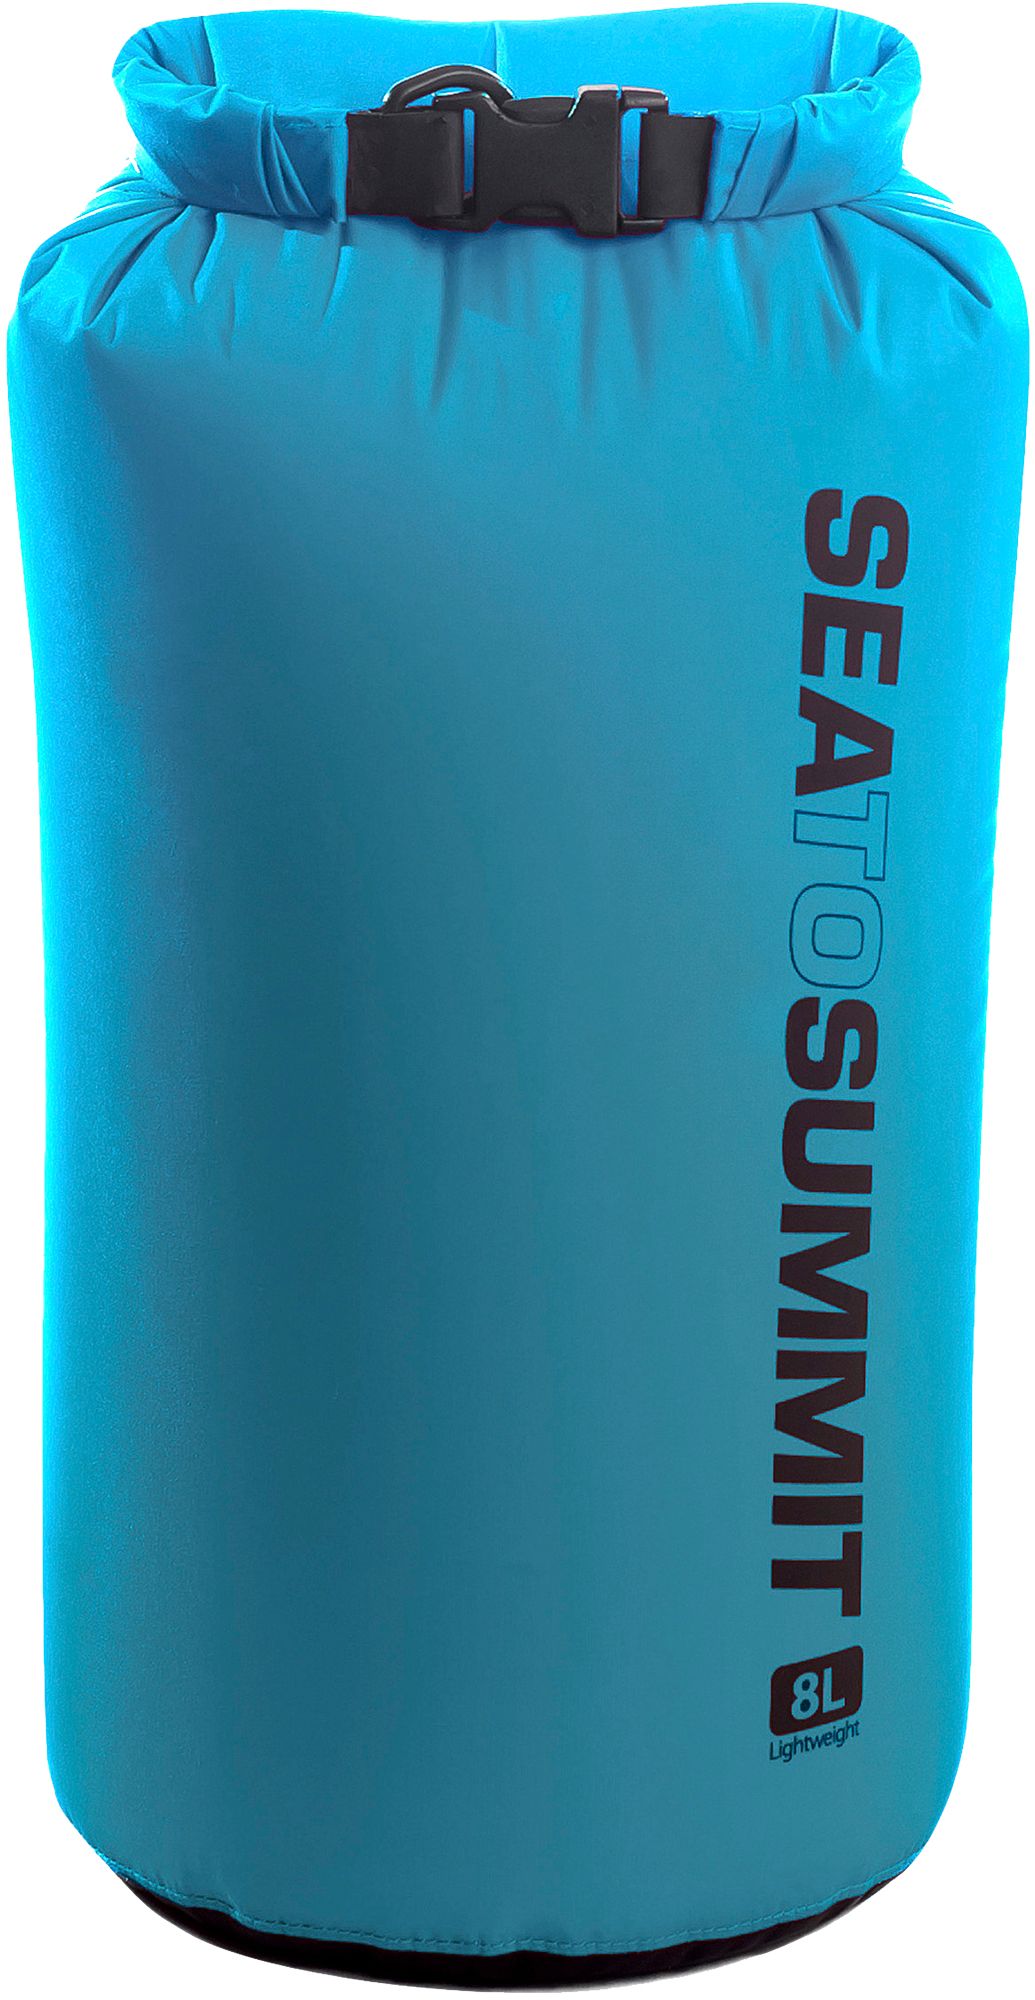 Photos - Outdoor Furniture Sea To Summit Lightweight Dry Sack, 20L, Blue 15S2SULGHTWGHTDRYCAC 